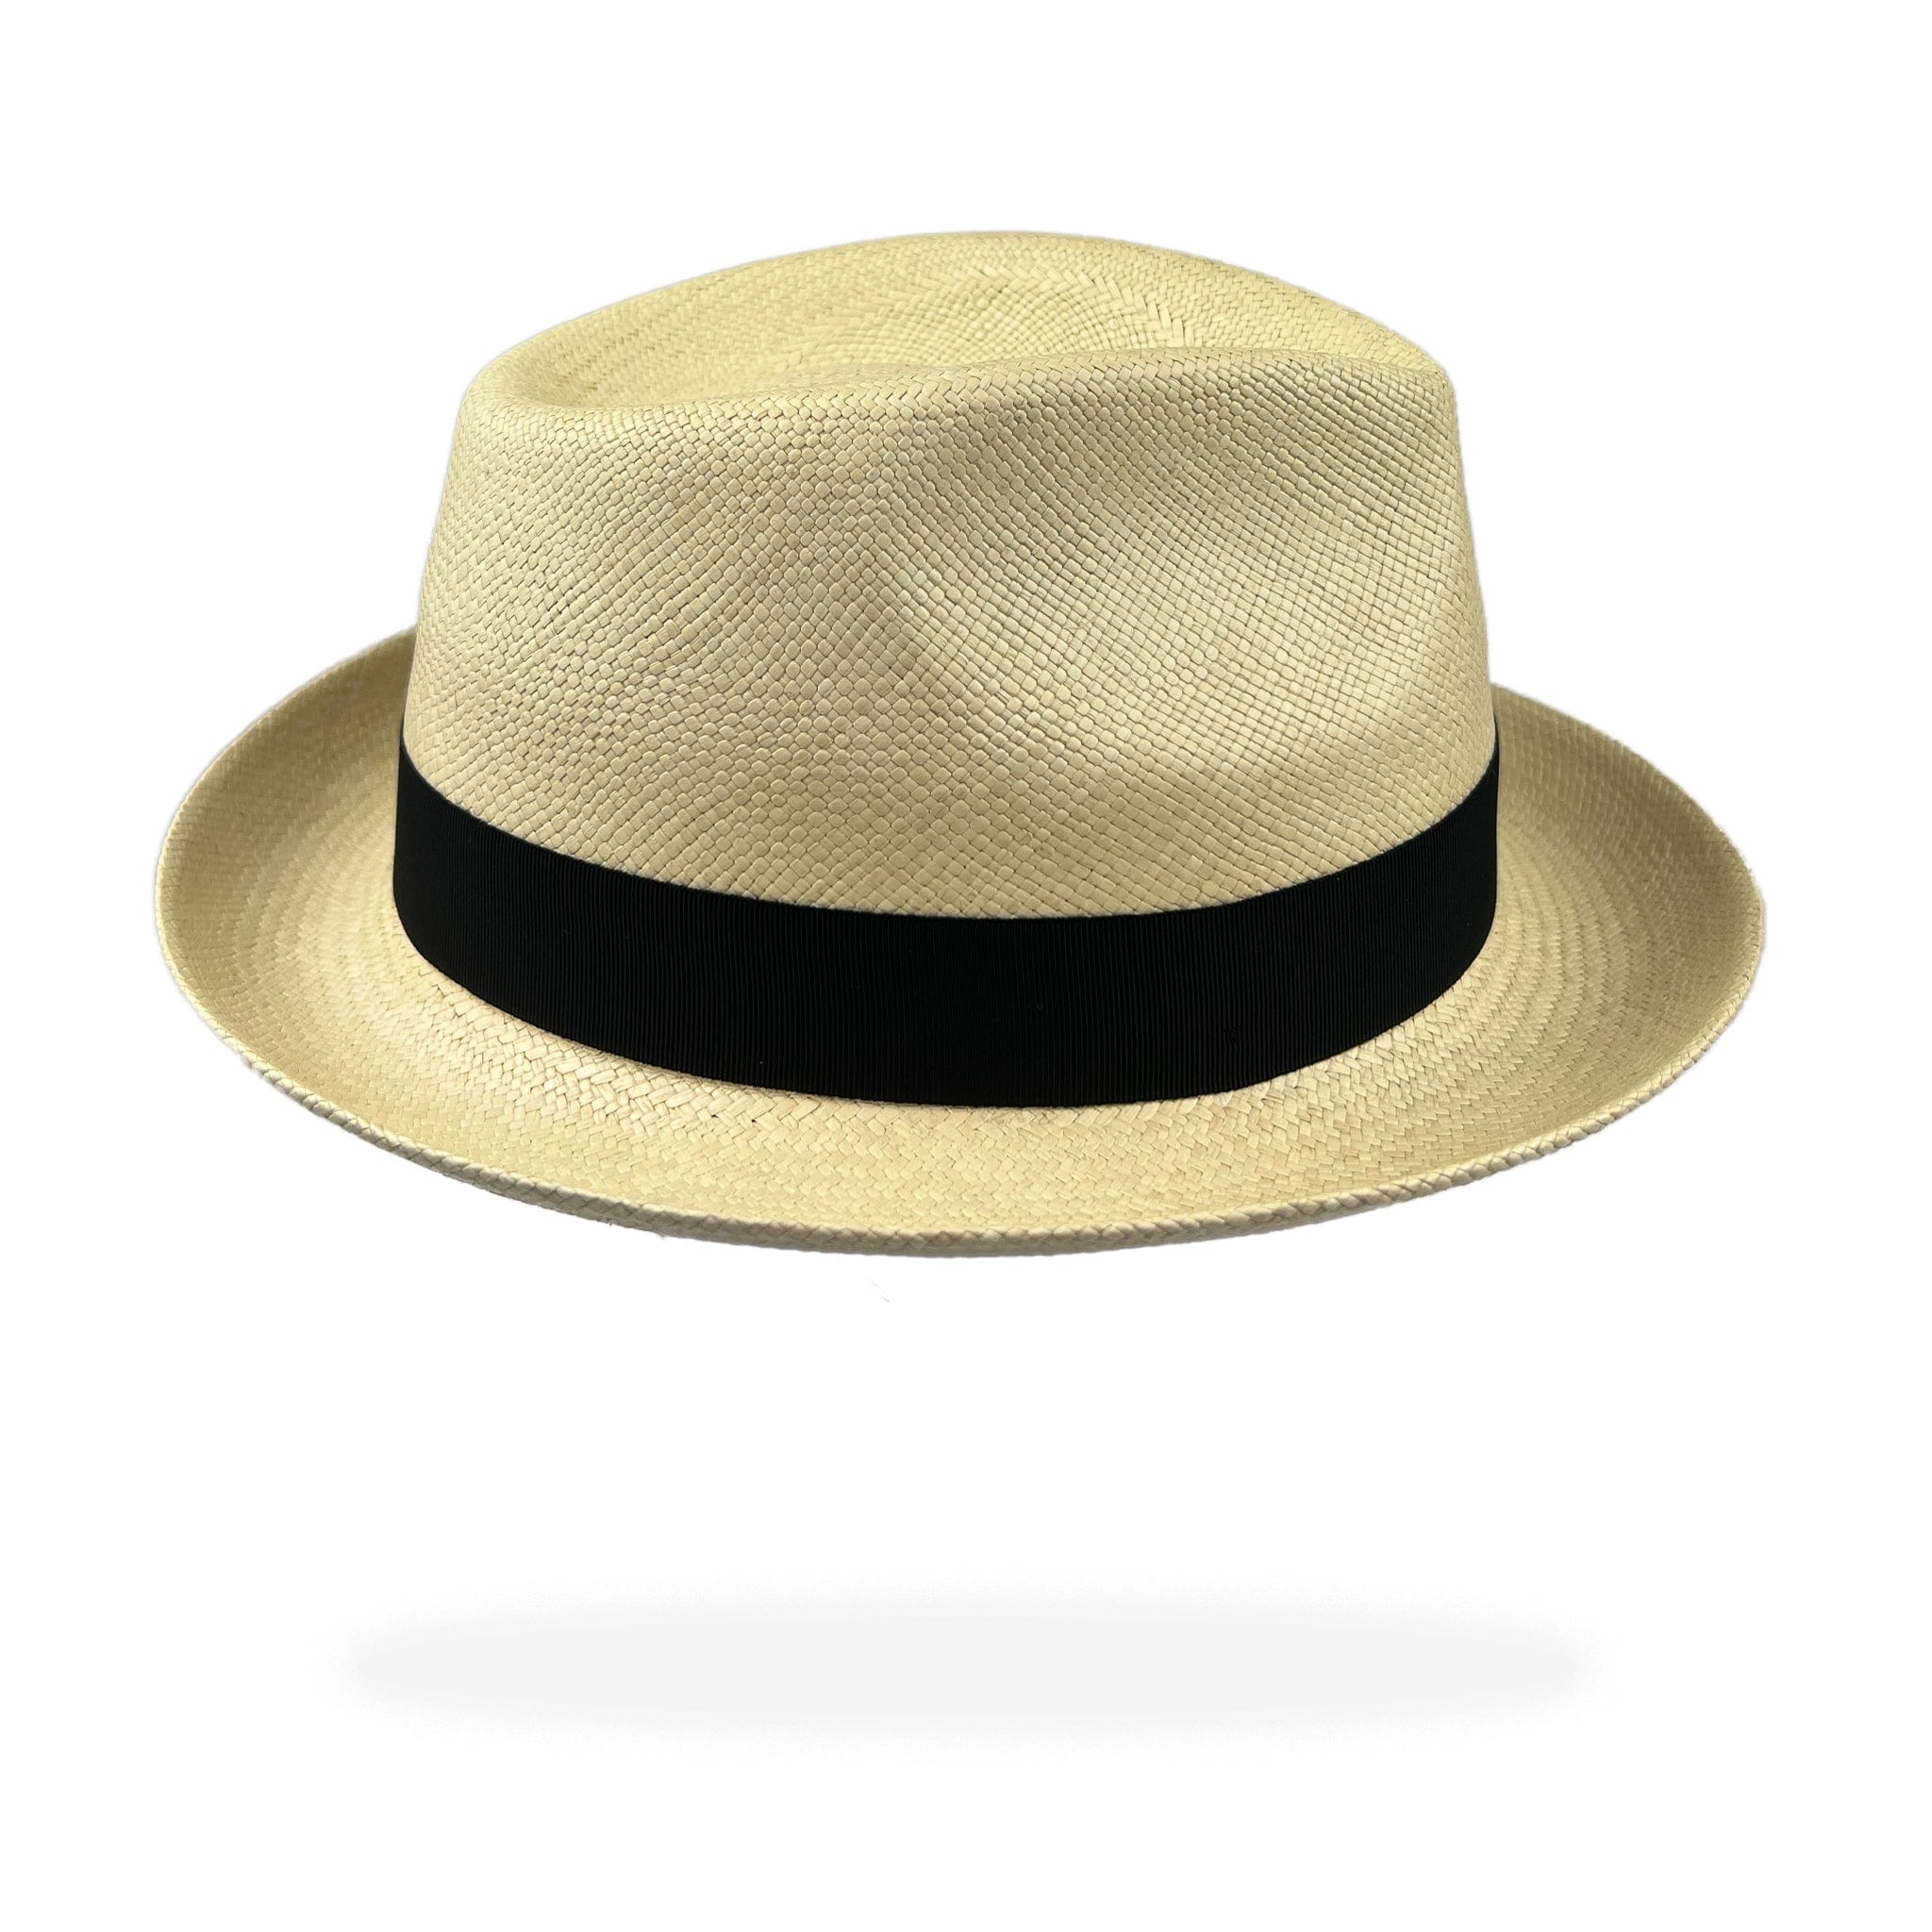 Unisex | Trilby Panama Hat | Natural Toquilla | Black Band | Made in Italy